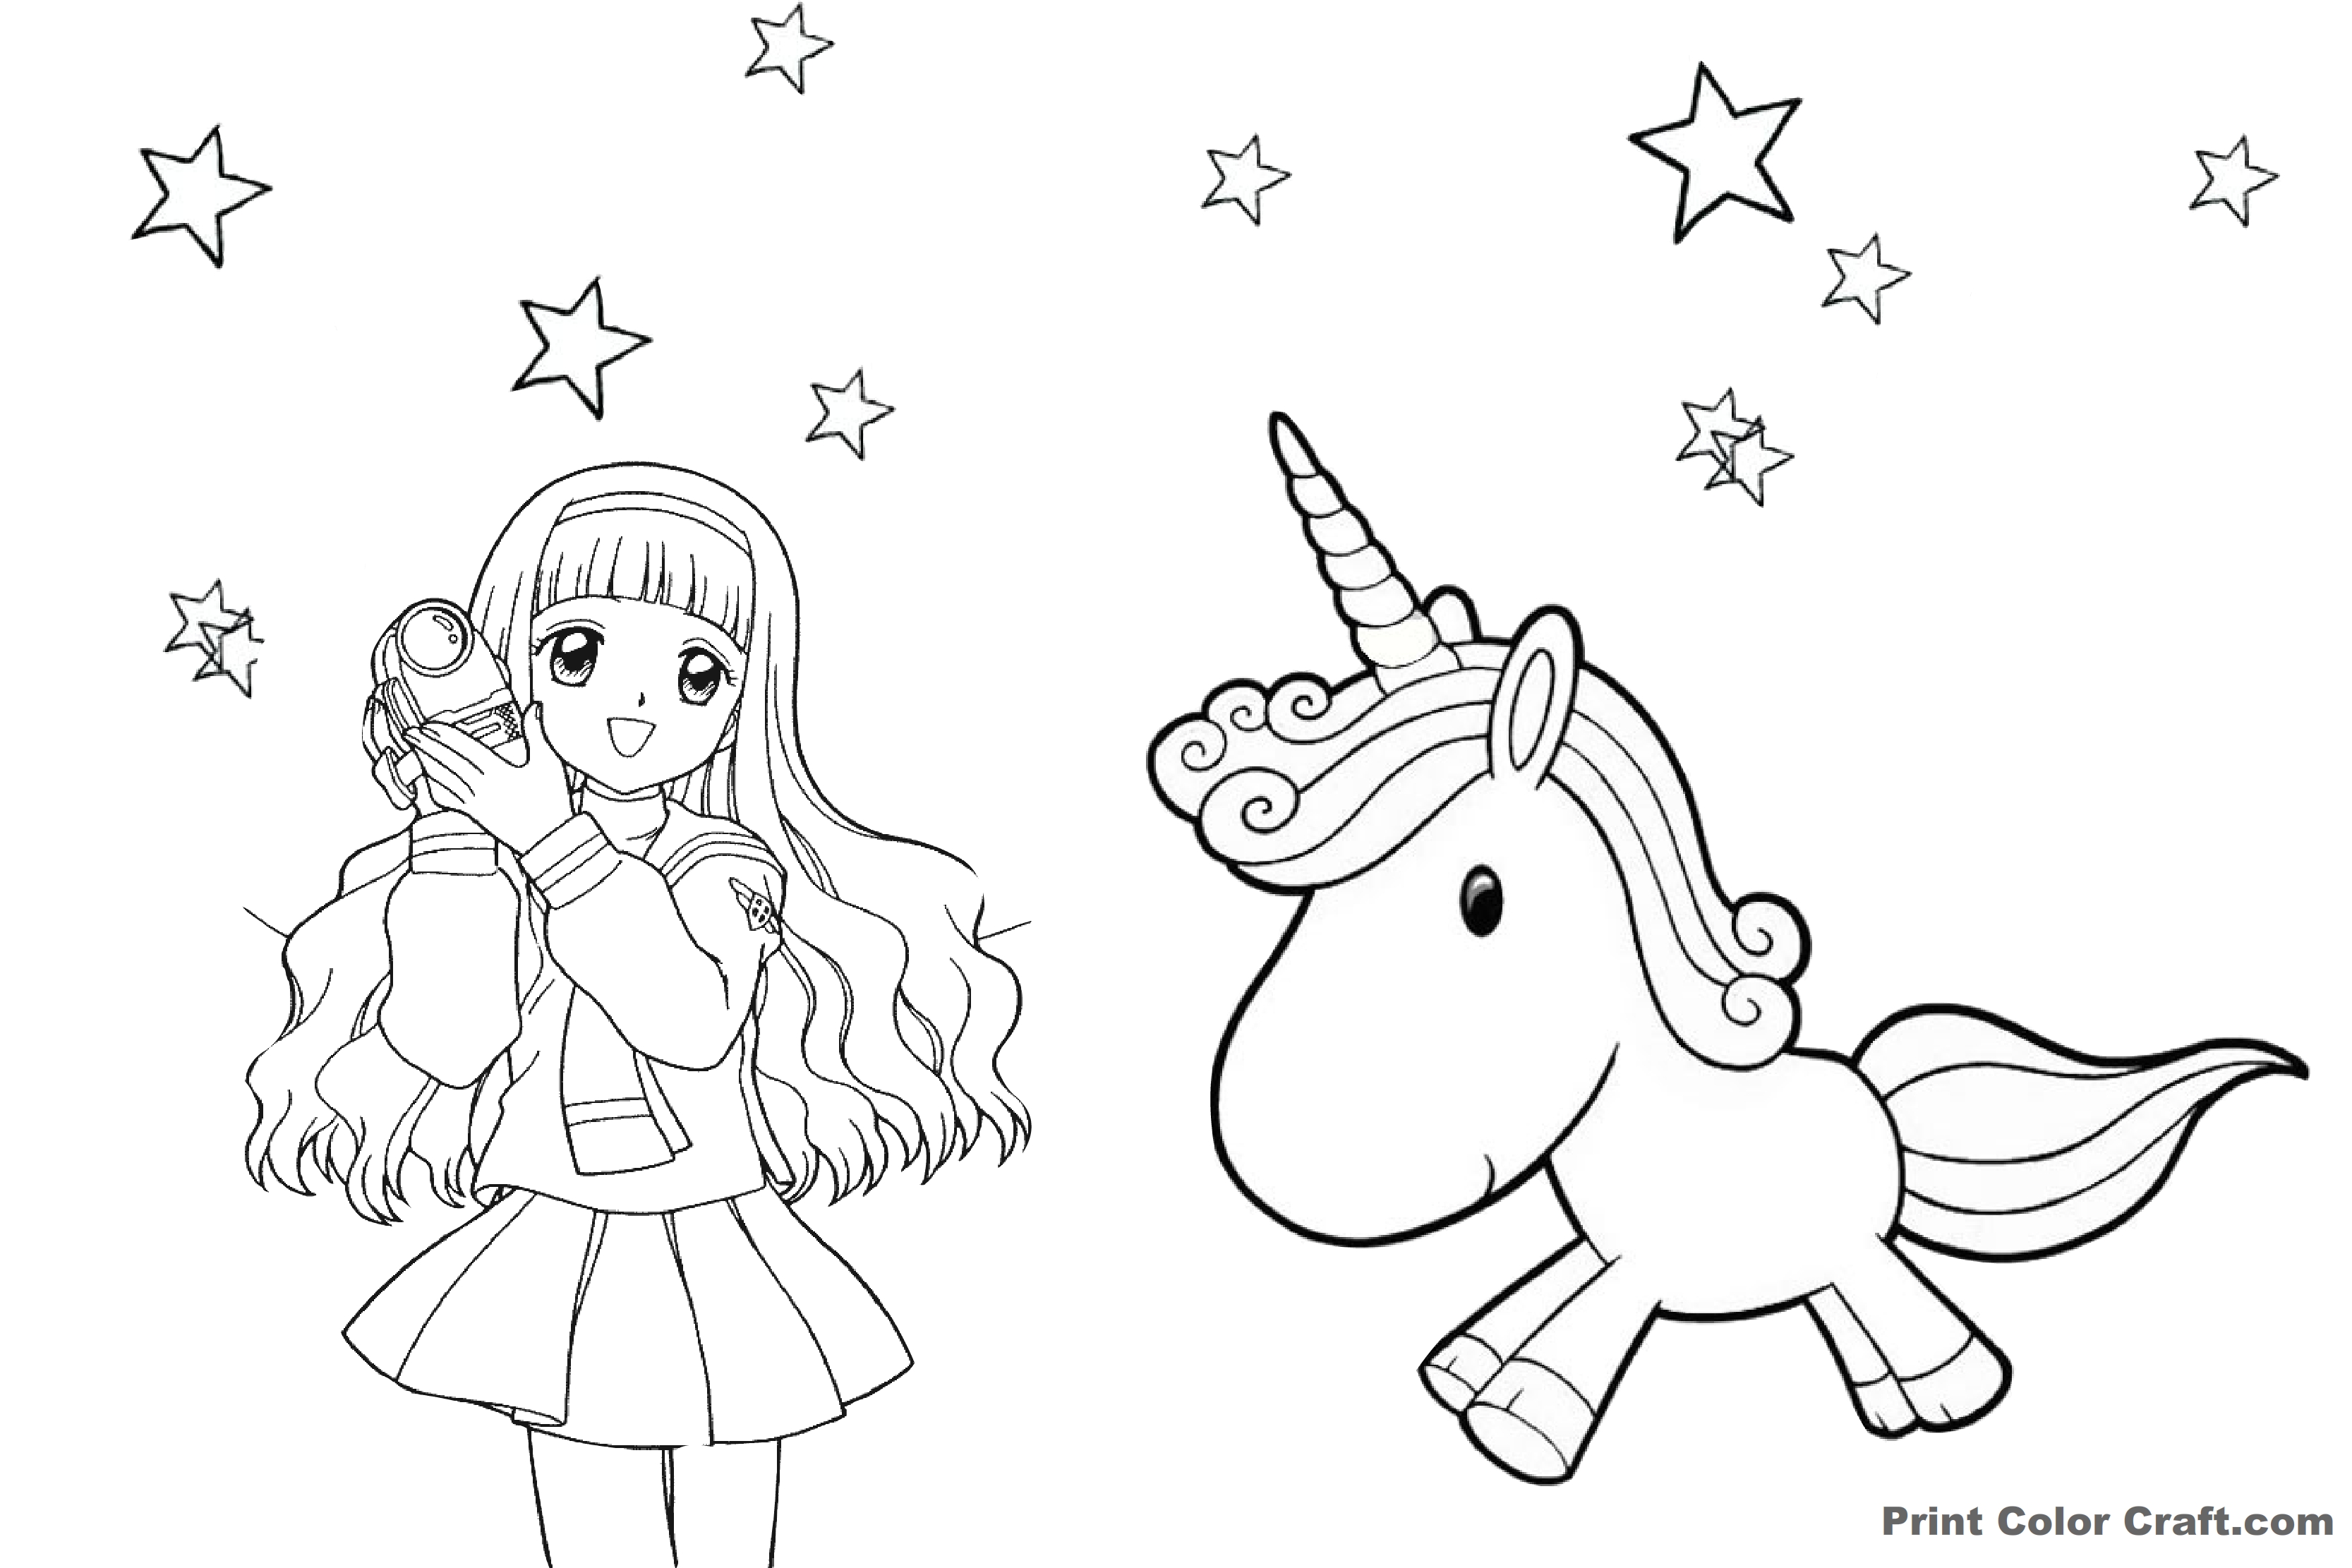 adorable unicorn coloring pages for girls and adults updated